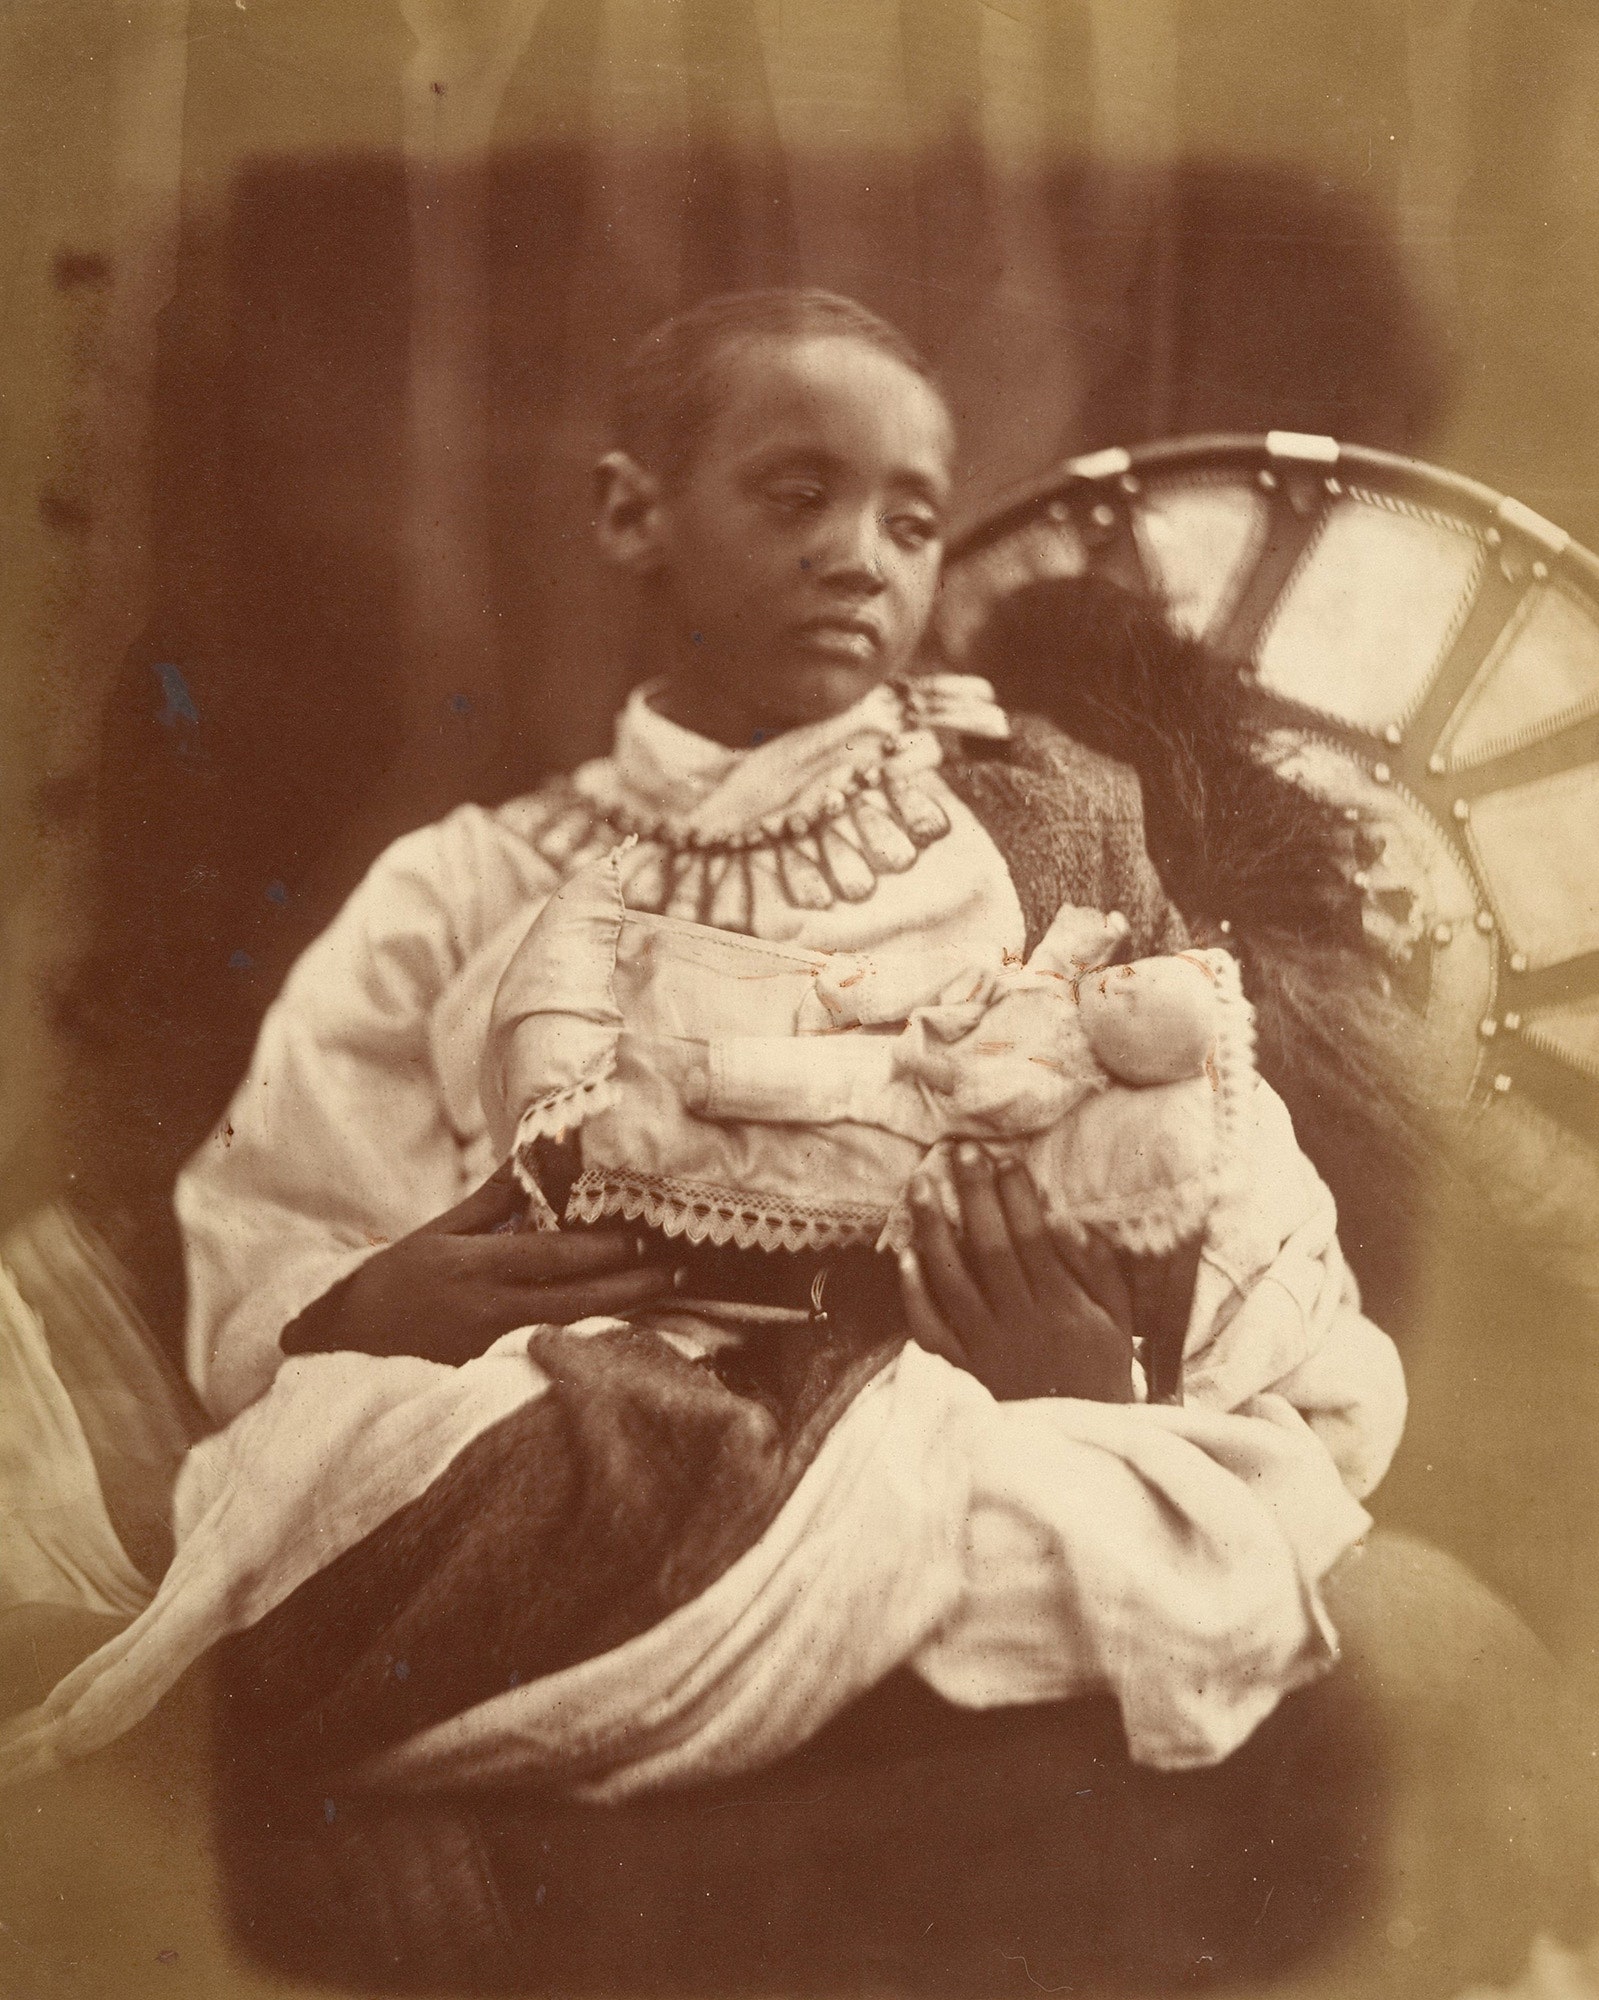 Buckingham Palace Explains Why It Won’t Return the Remains of an Ethiopian Prince